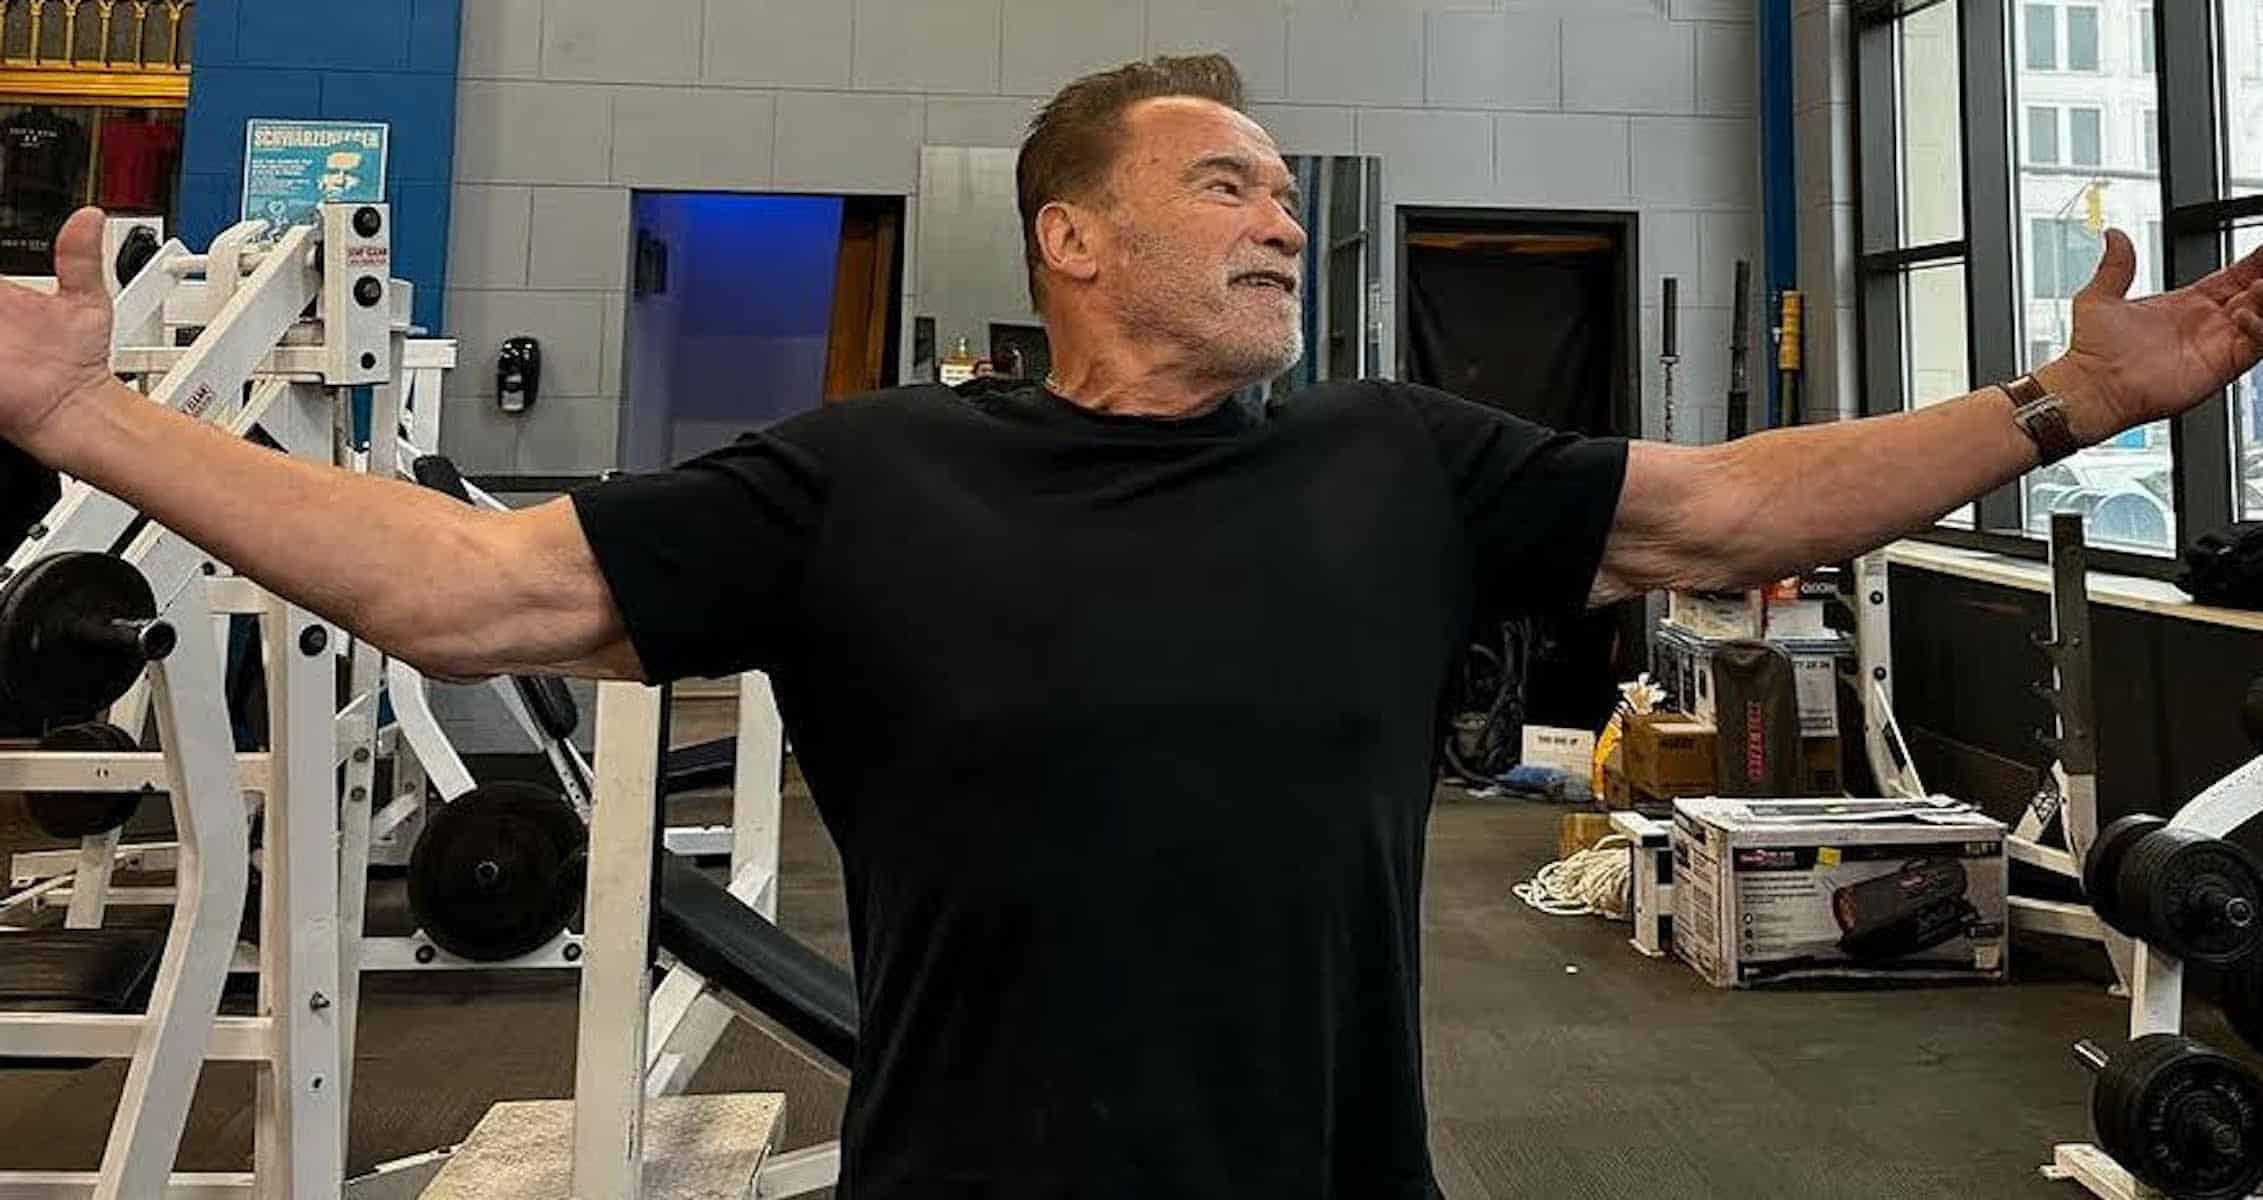 Arnold shared tips on how to stay healthy while sitting all day.